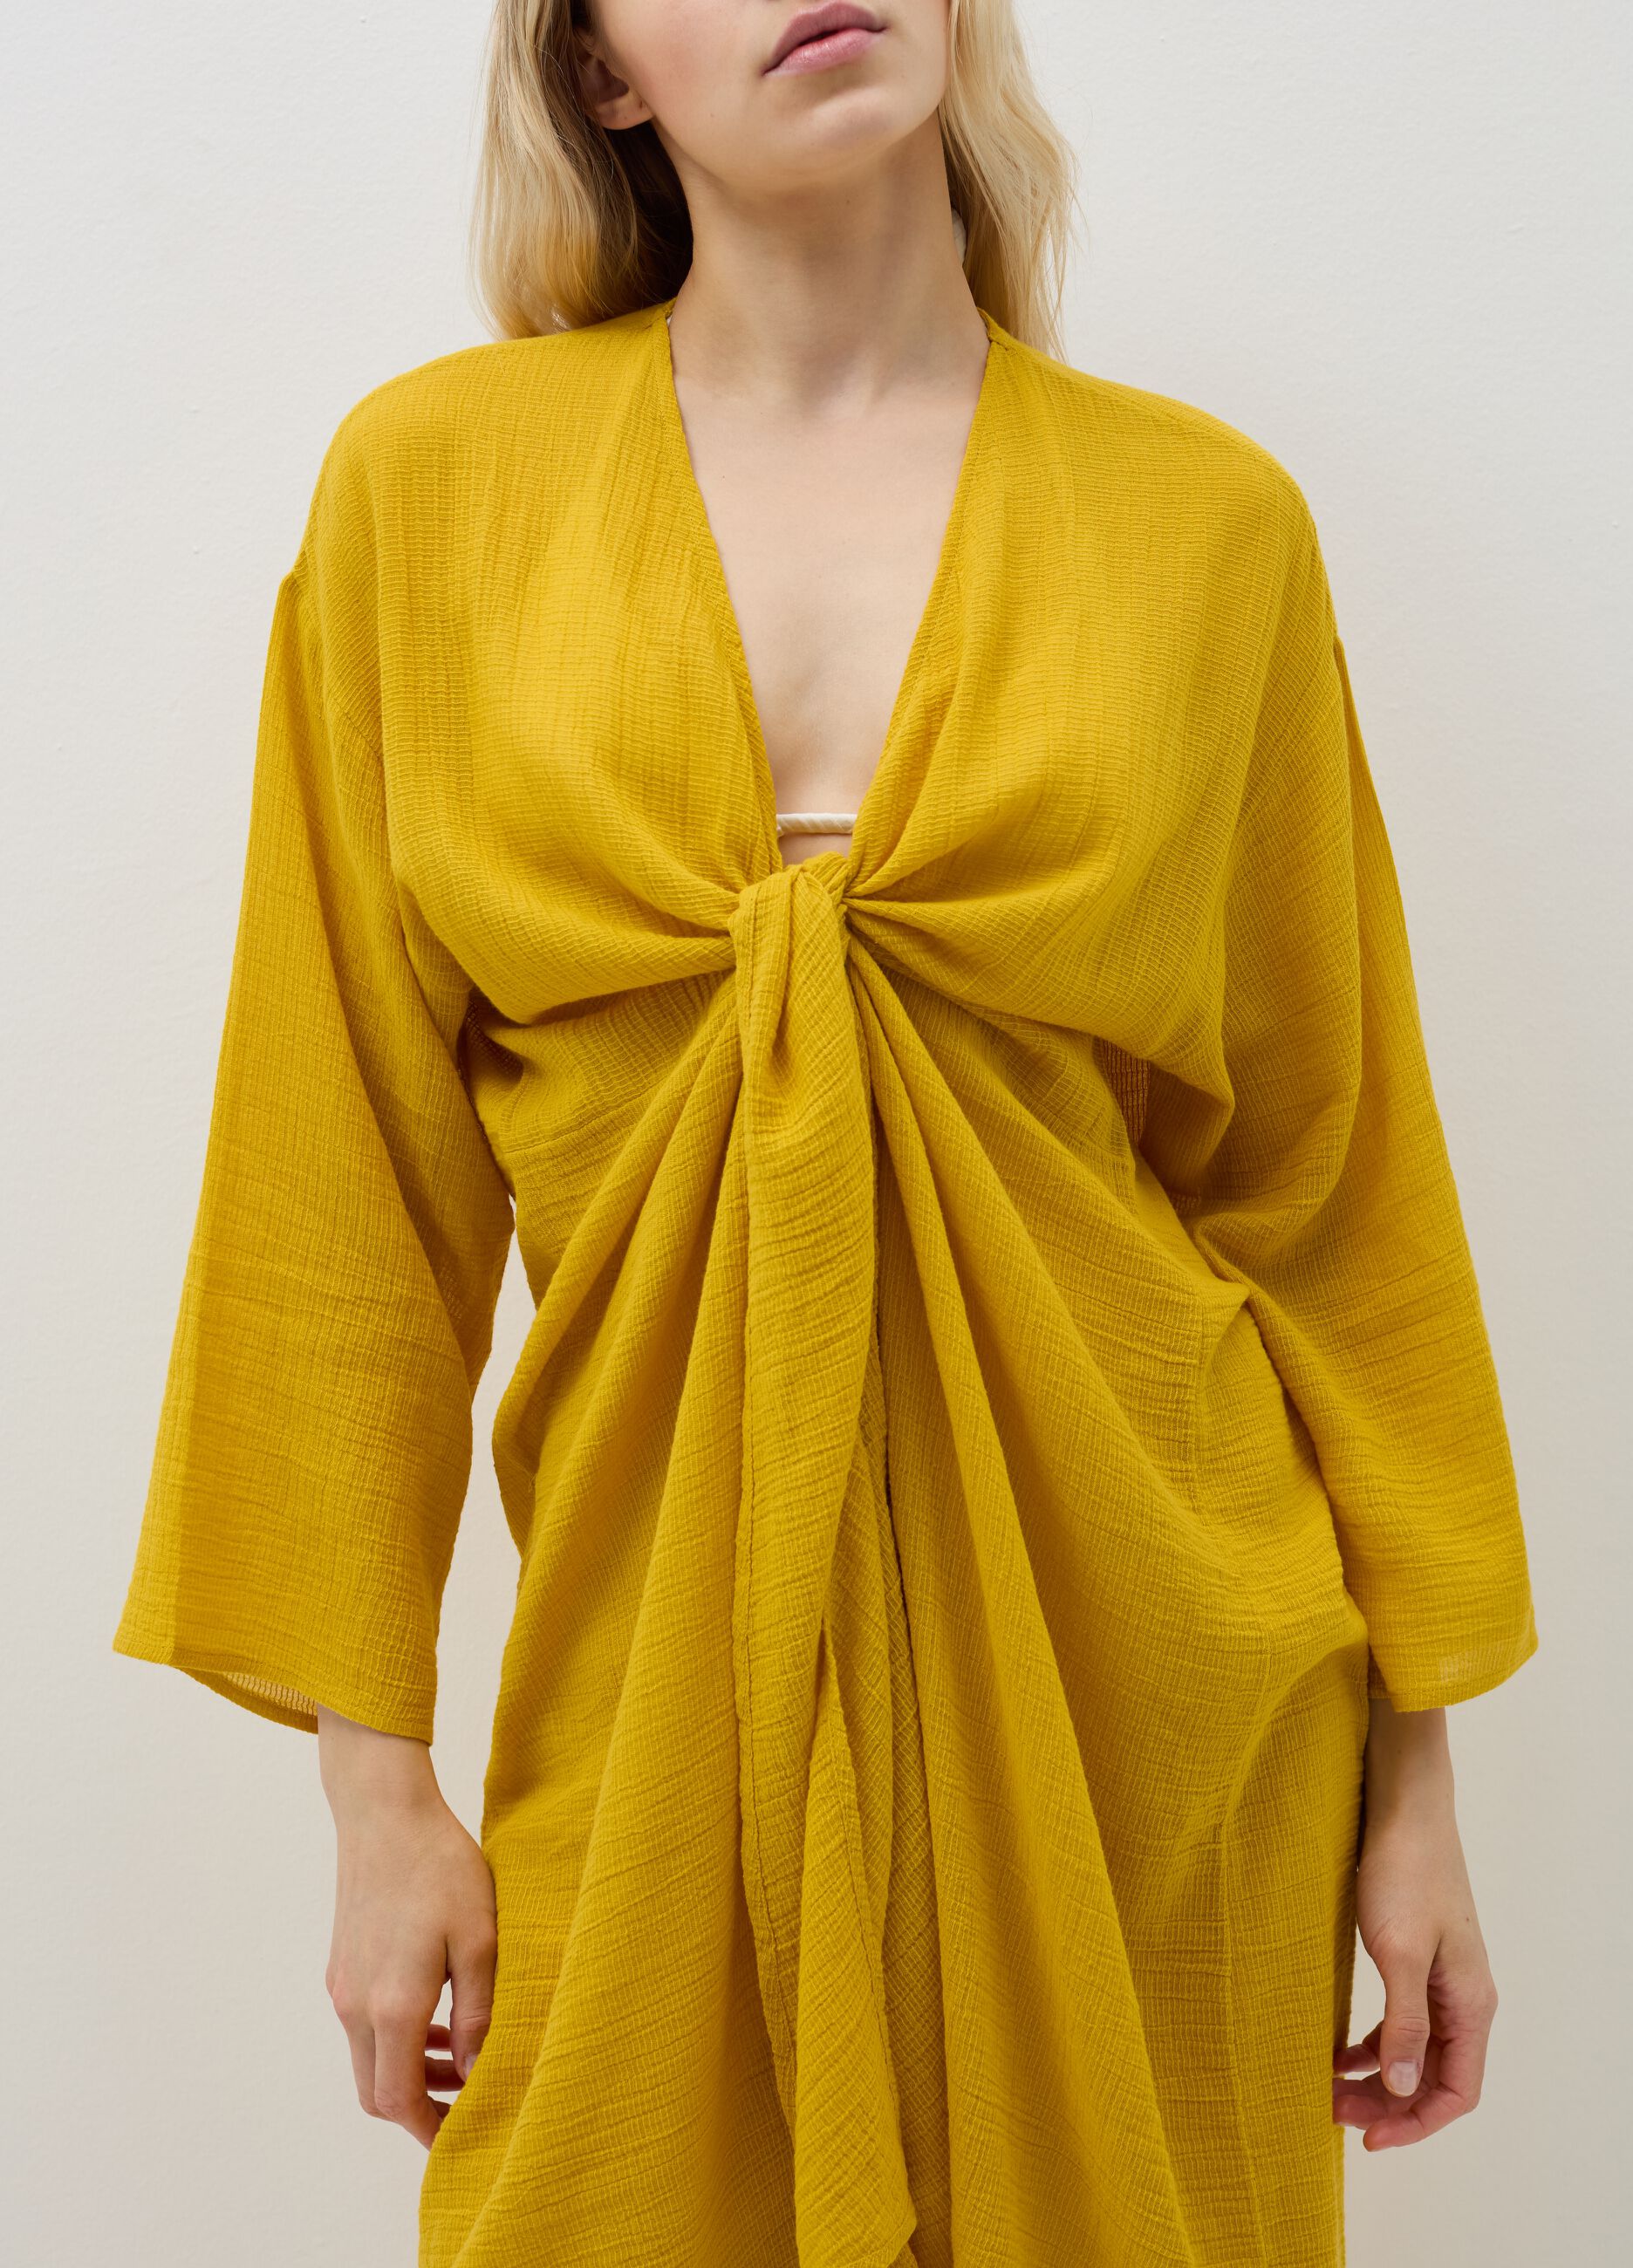 Beach cover-up kimono with V neck and knot